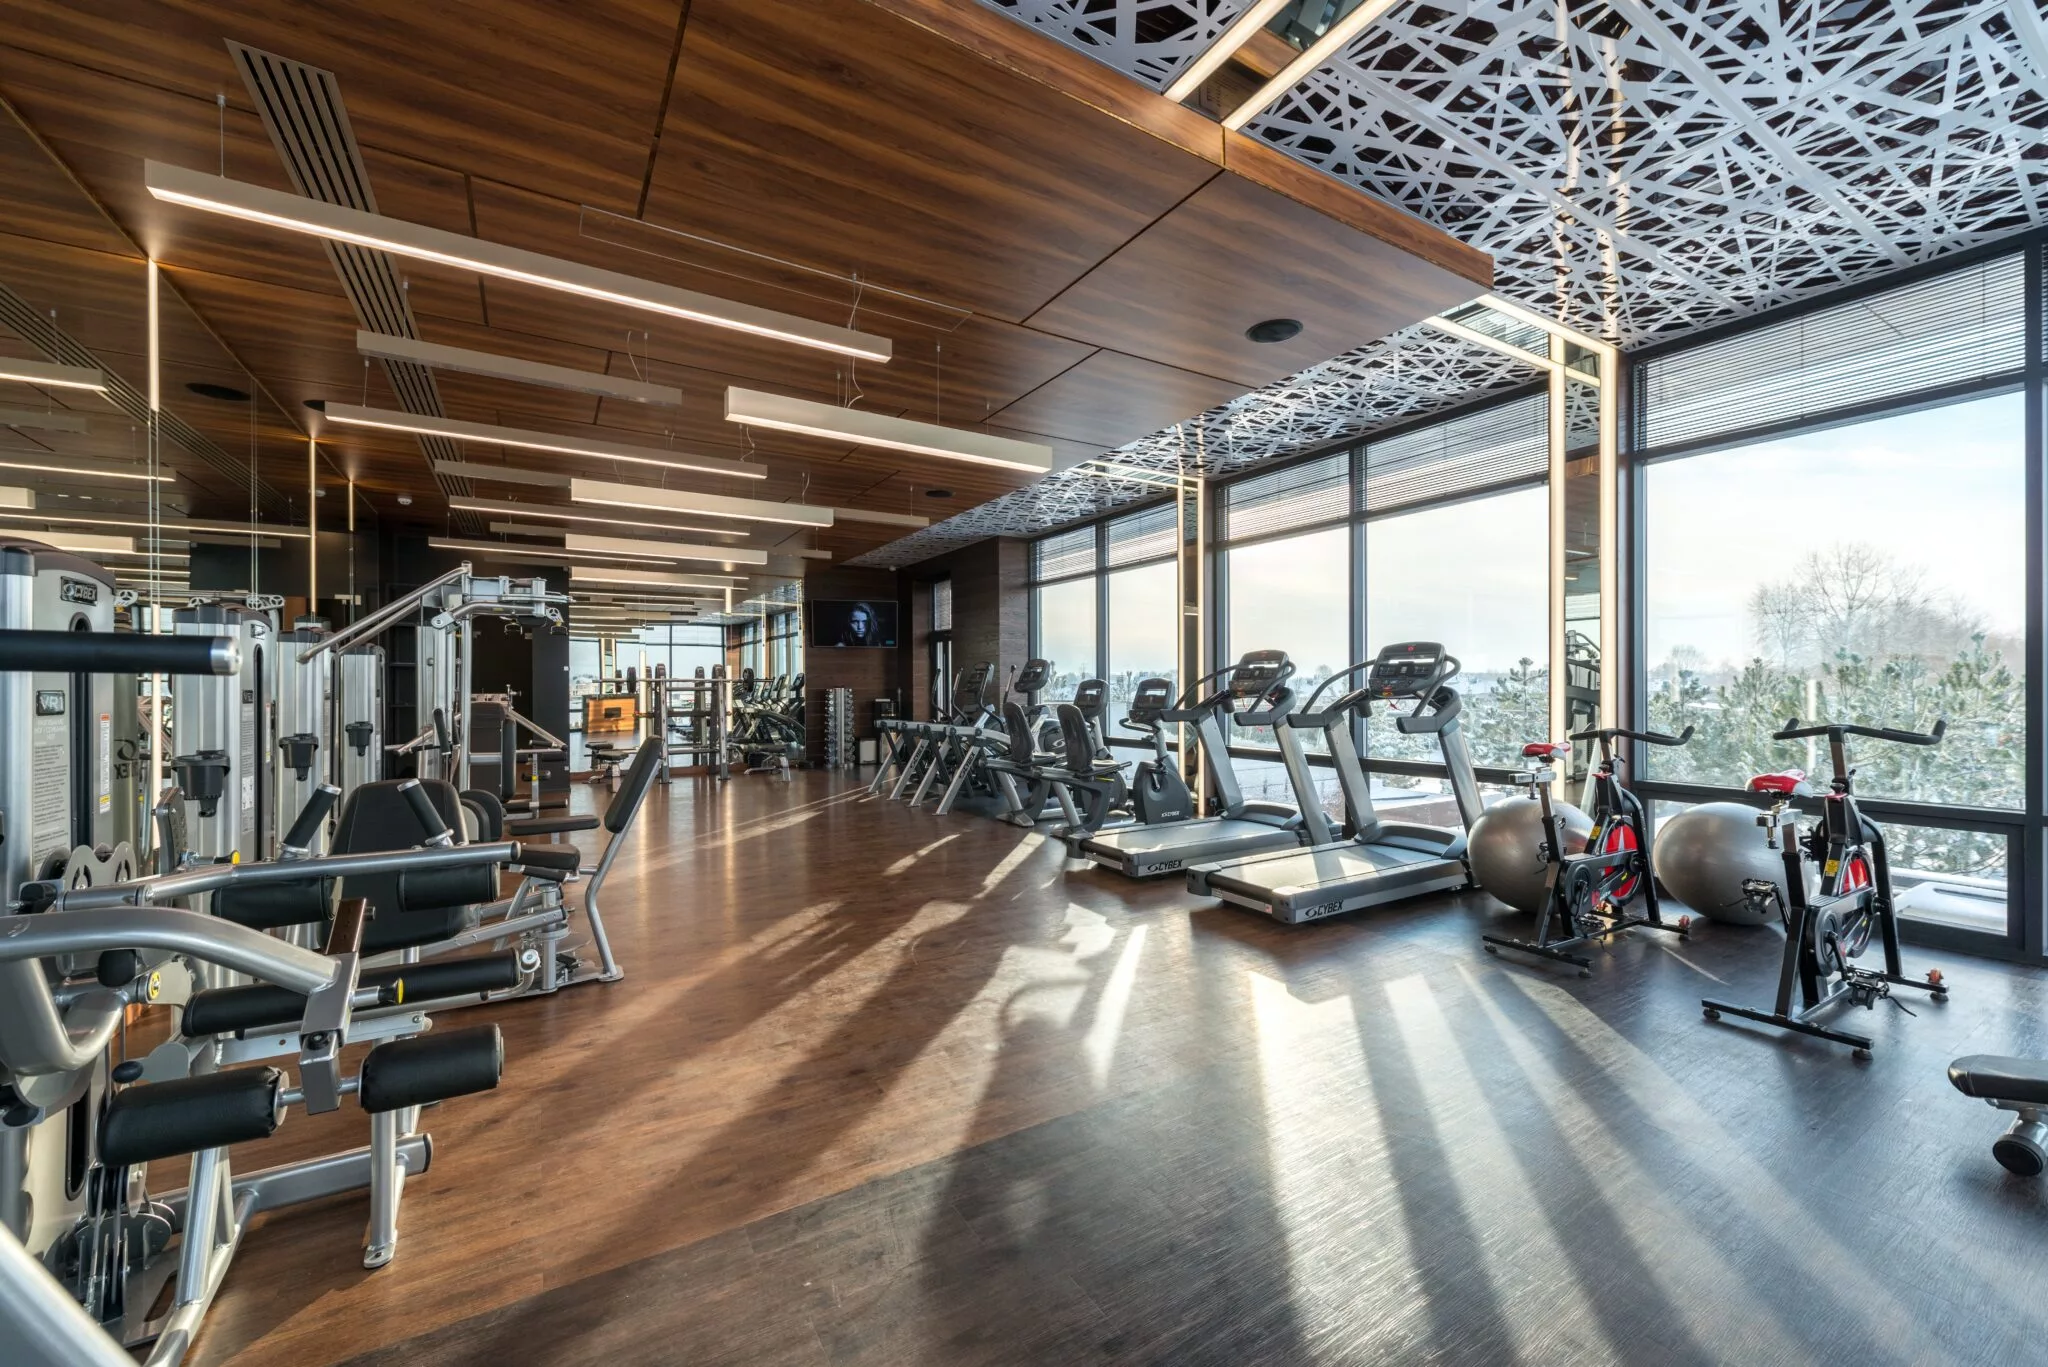 Maintaining Hygiene and Safety: The Importance of Cleaning Fitness Facilities